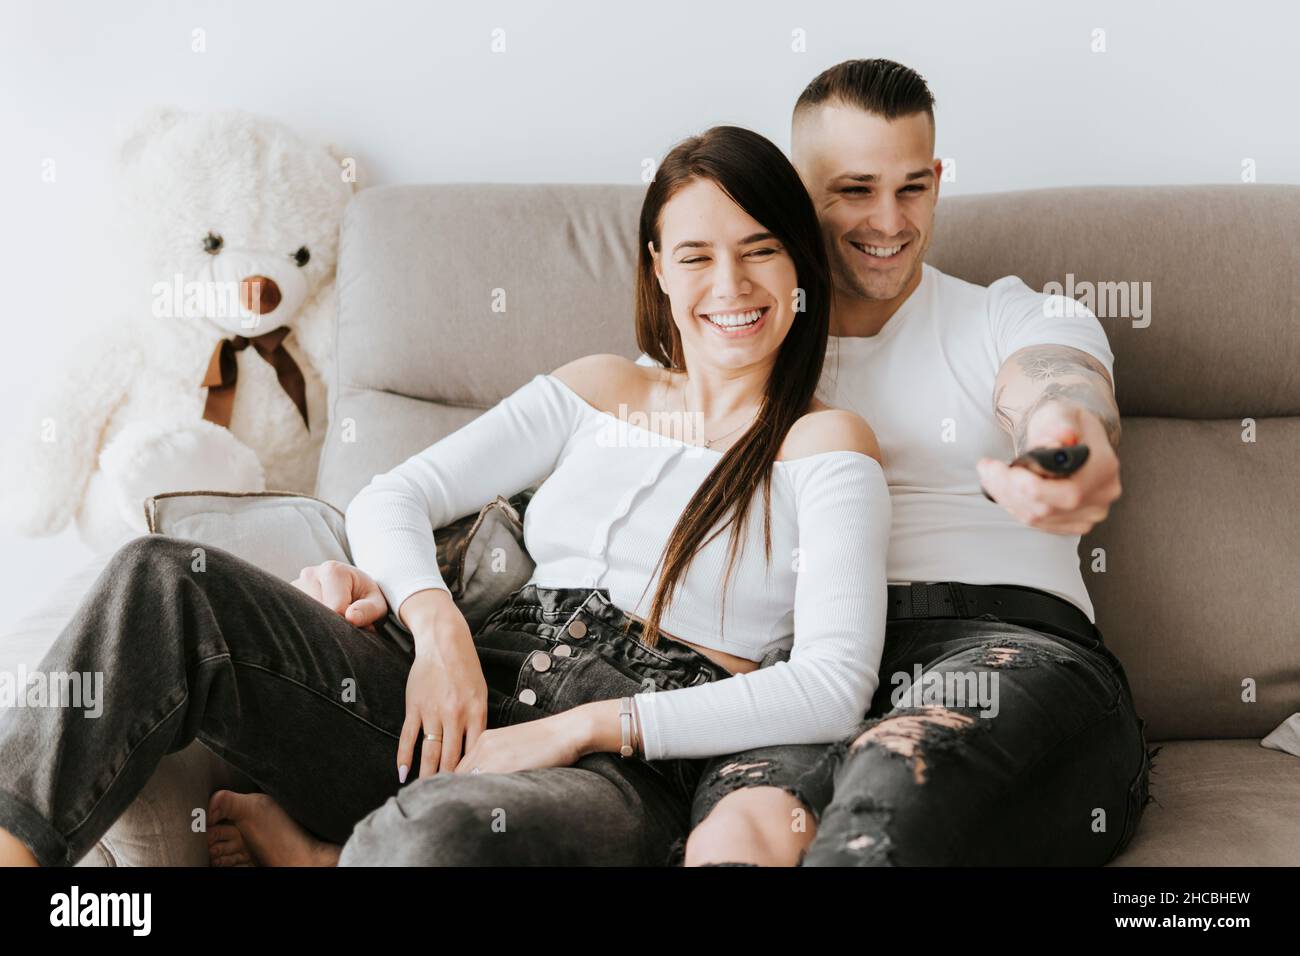 Smiling man holding remote watching TV with woman on sofa Stock Photo